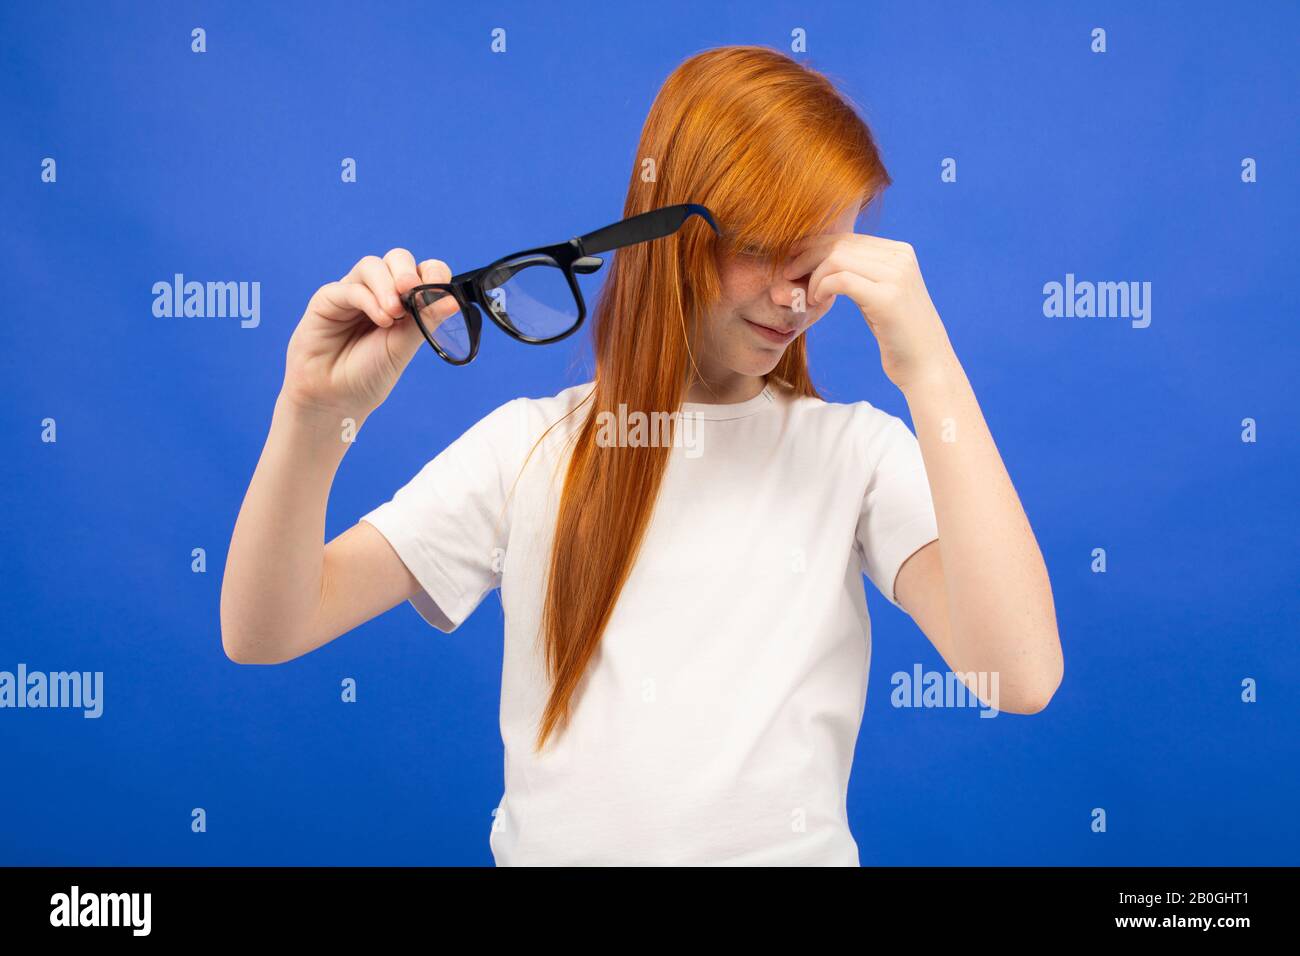 red-haired teenager girl squints while holding glasses in her hand on a blue studio background Stock Photo